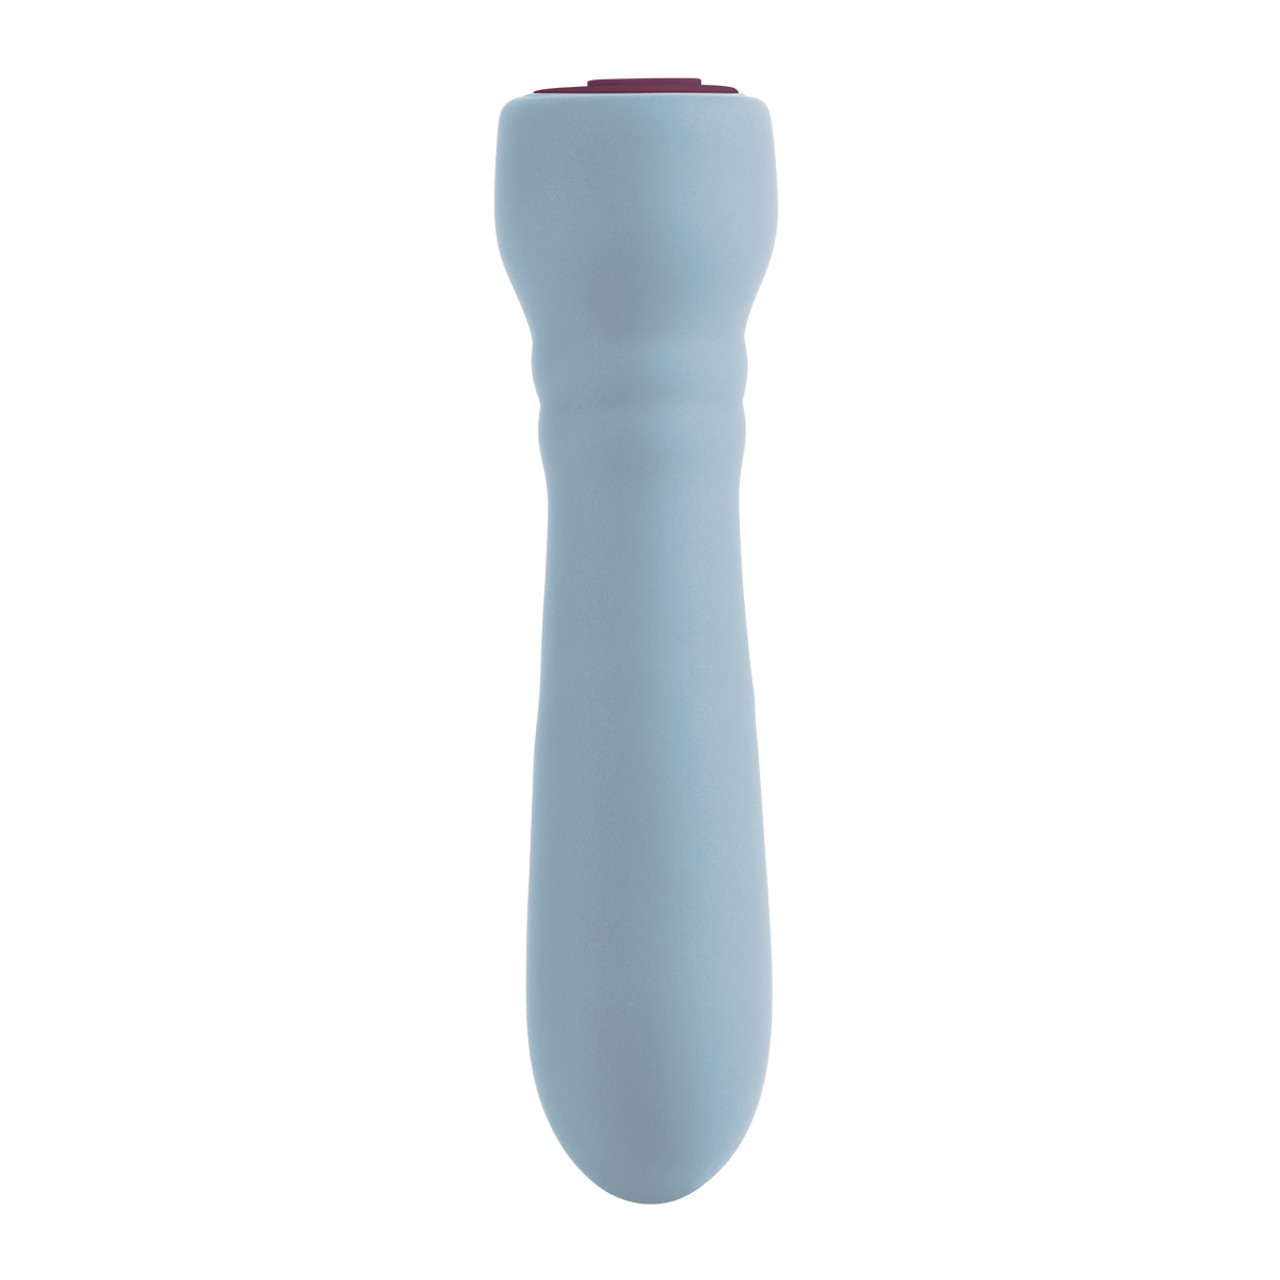 Buy the Booster Bullet 20-function Rechargeable Silicone Vibrator